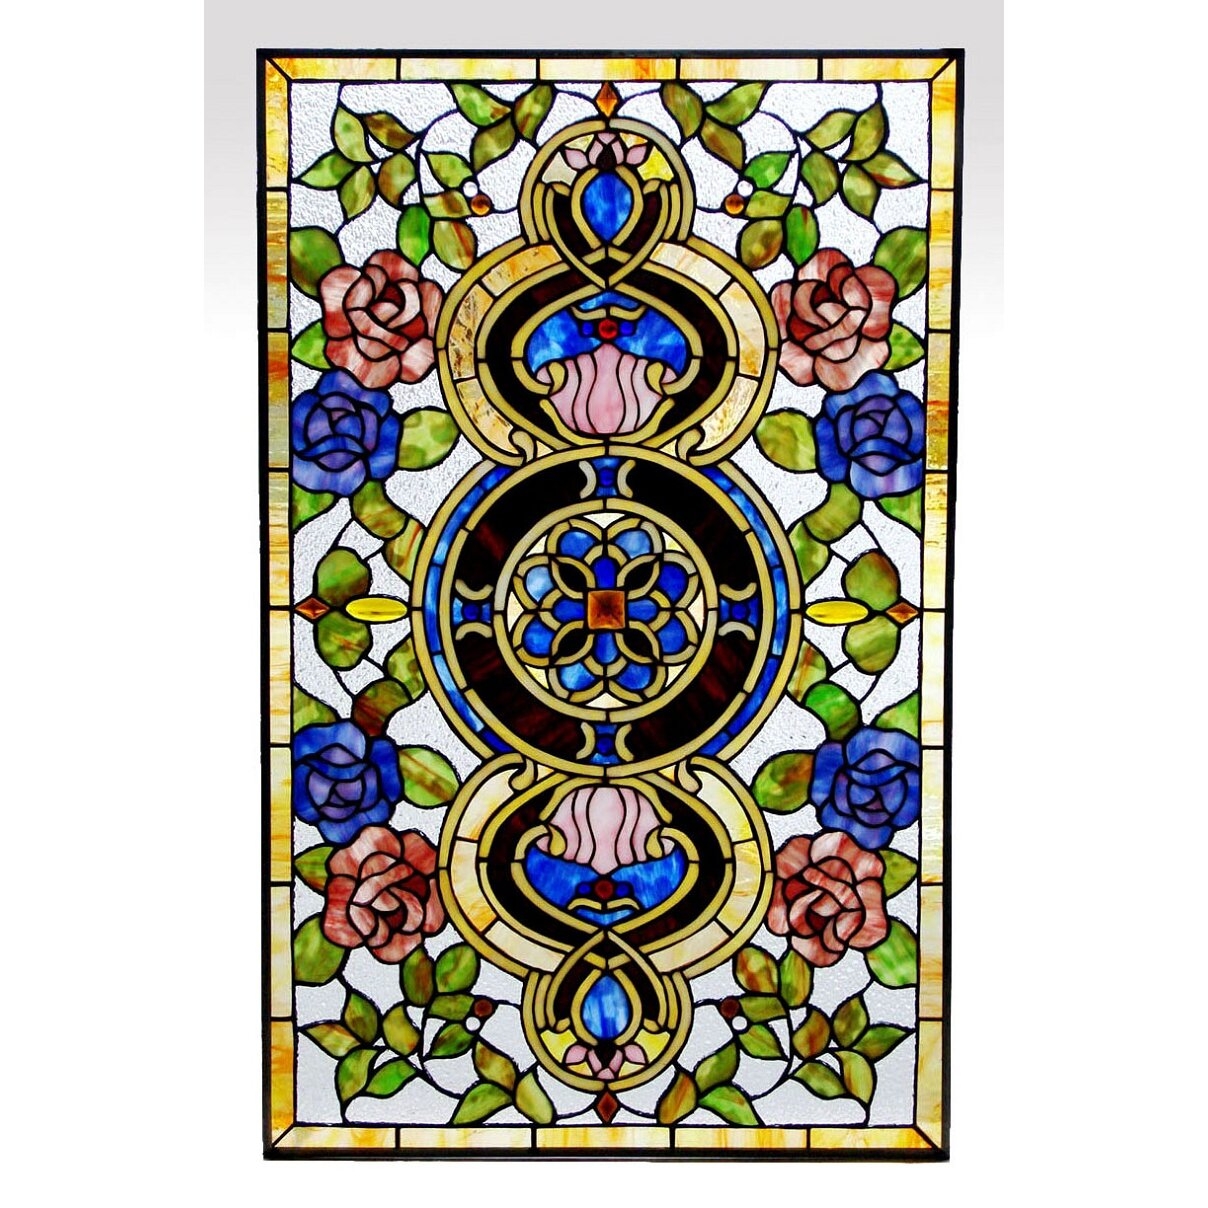 Tiffany Style Stained Glass Window Panel Very Colorful Floral Medallion Design